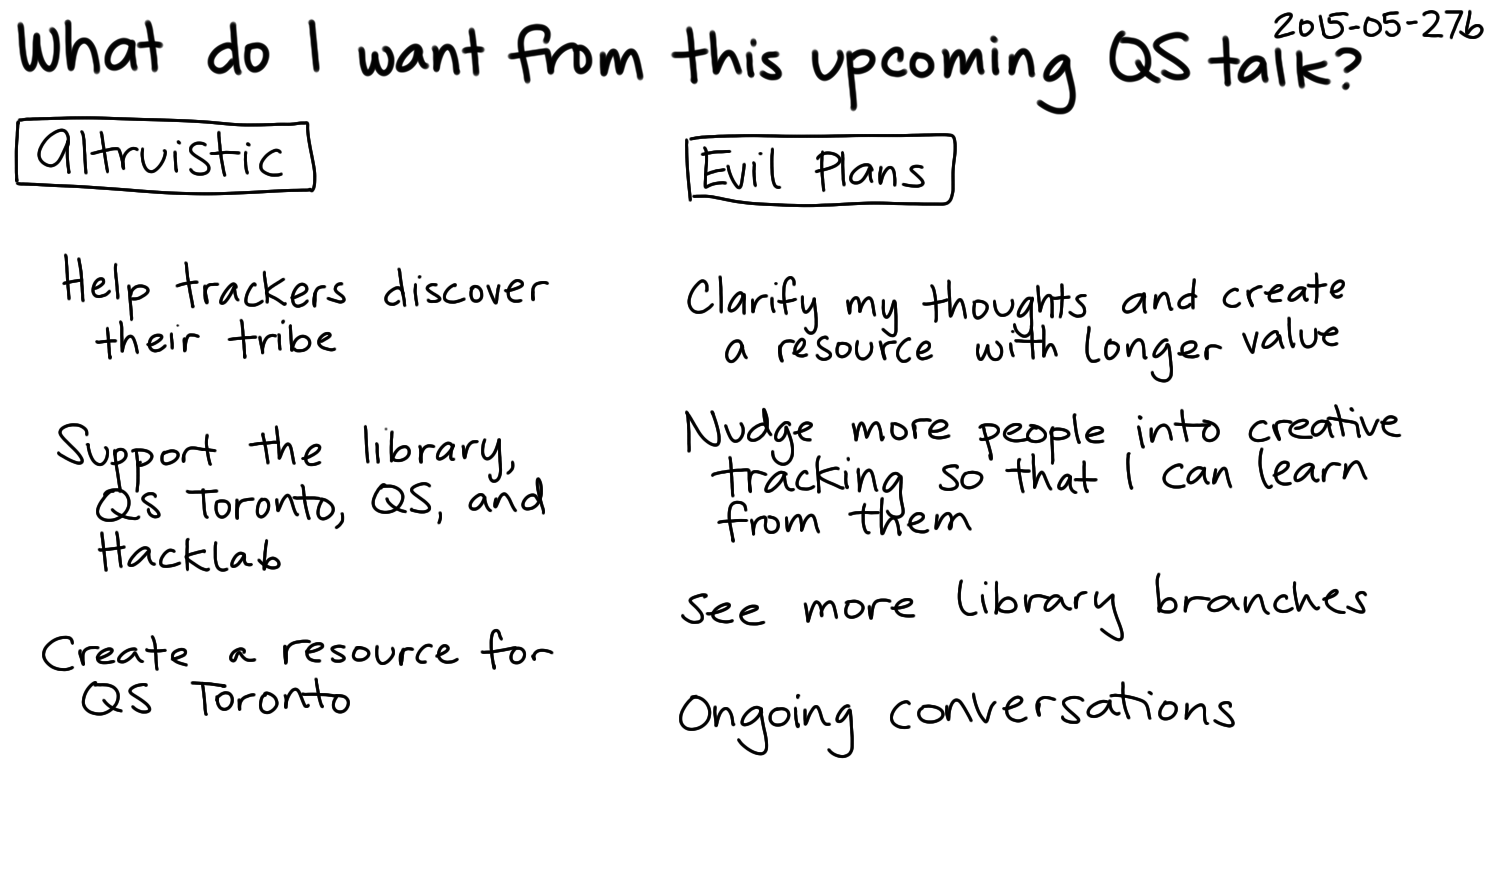 2015-05-27b What do I want from this upcoming QS talk -- index card #speaking #plans.png